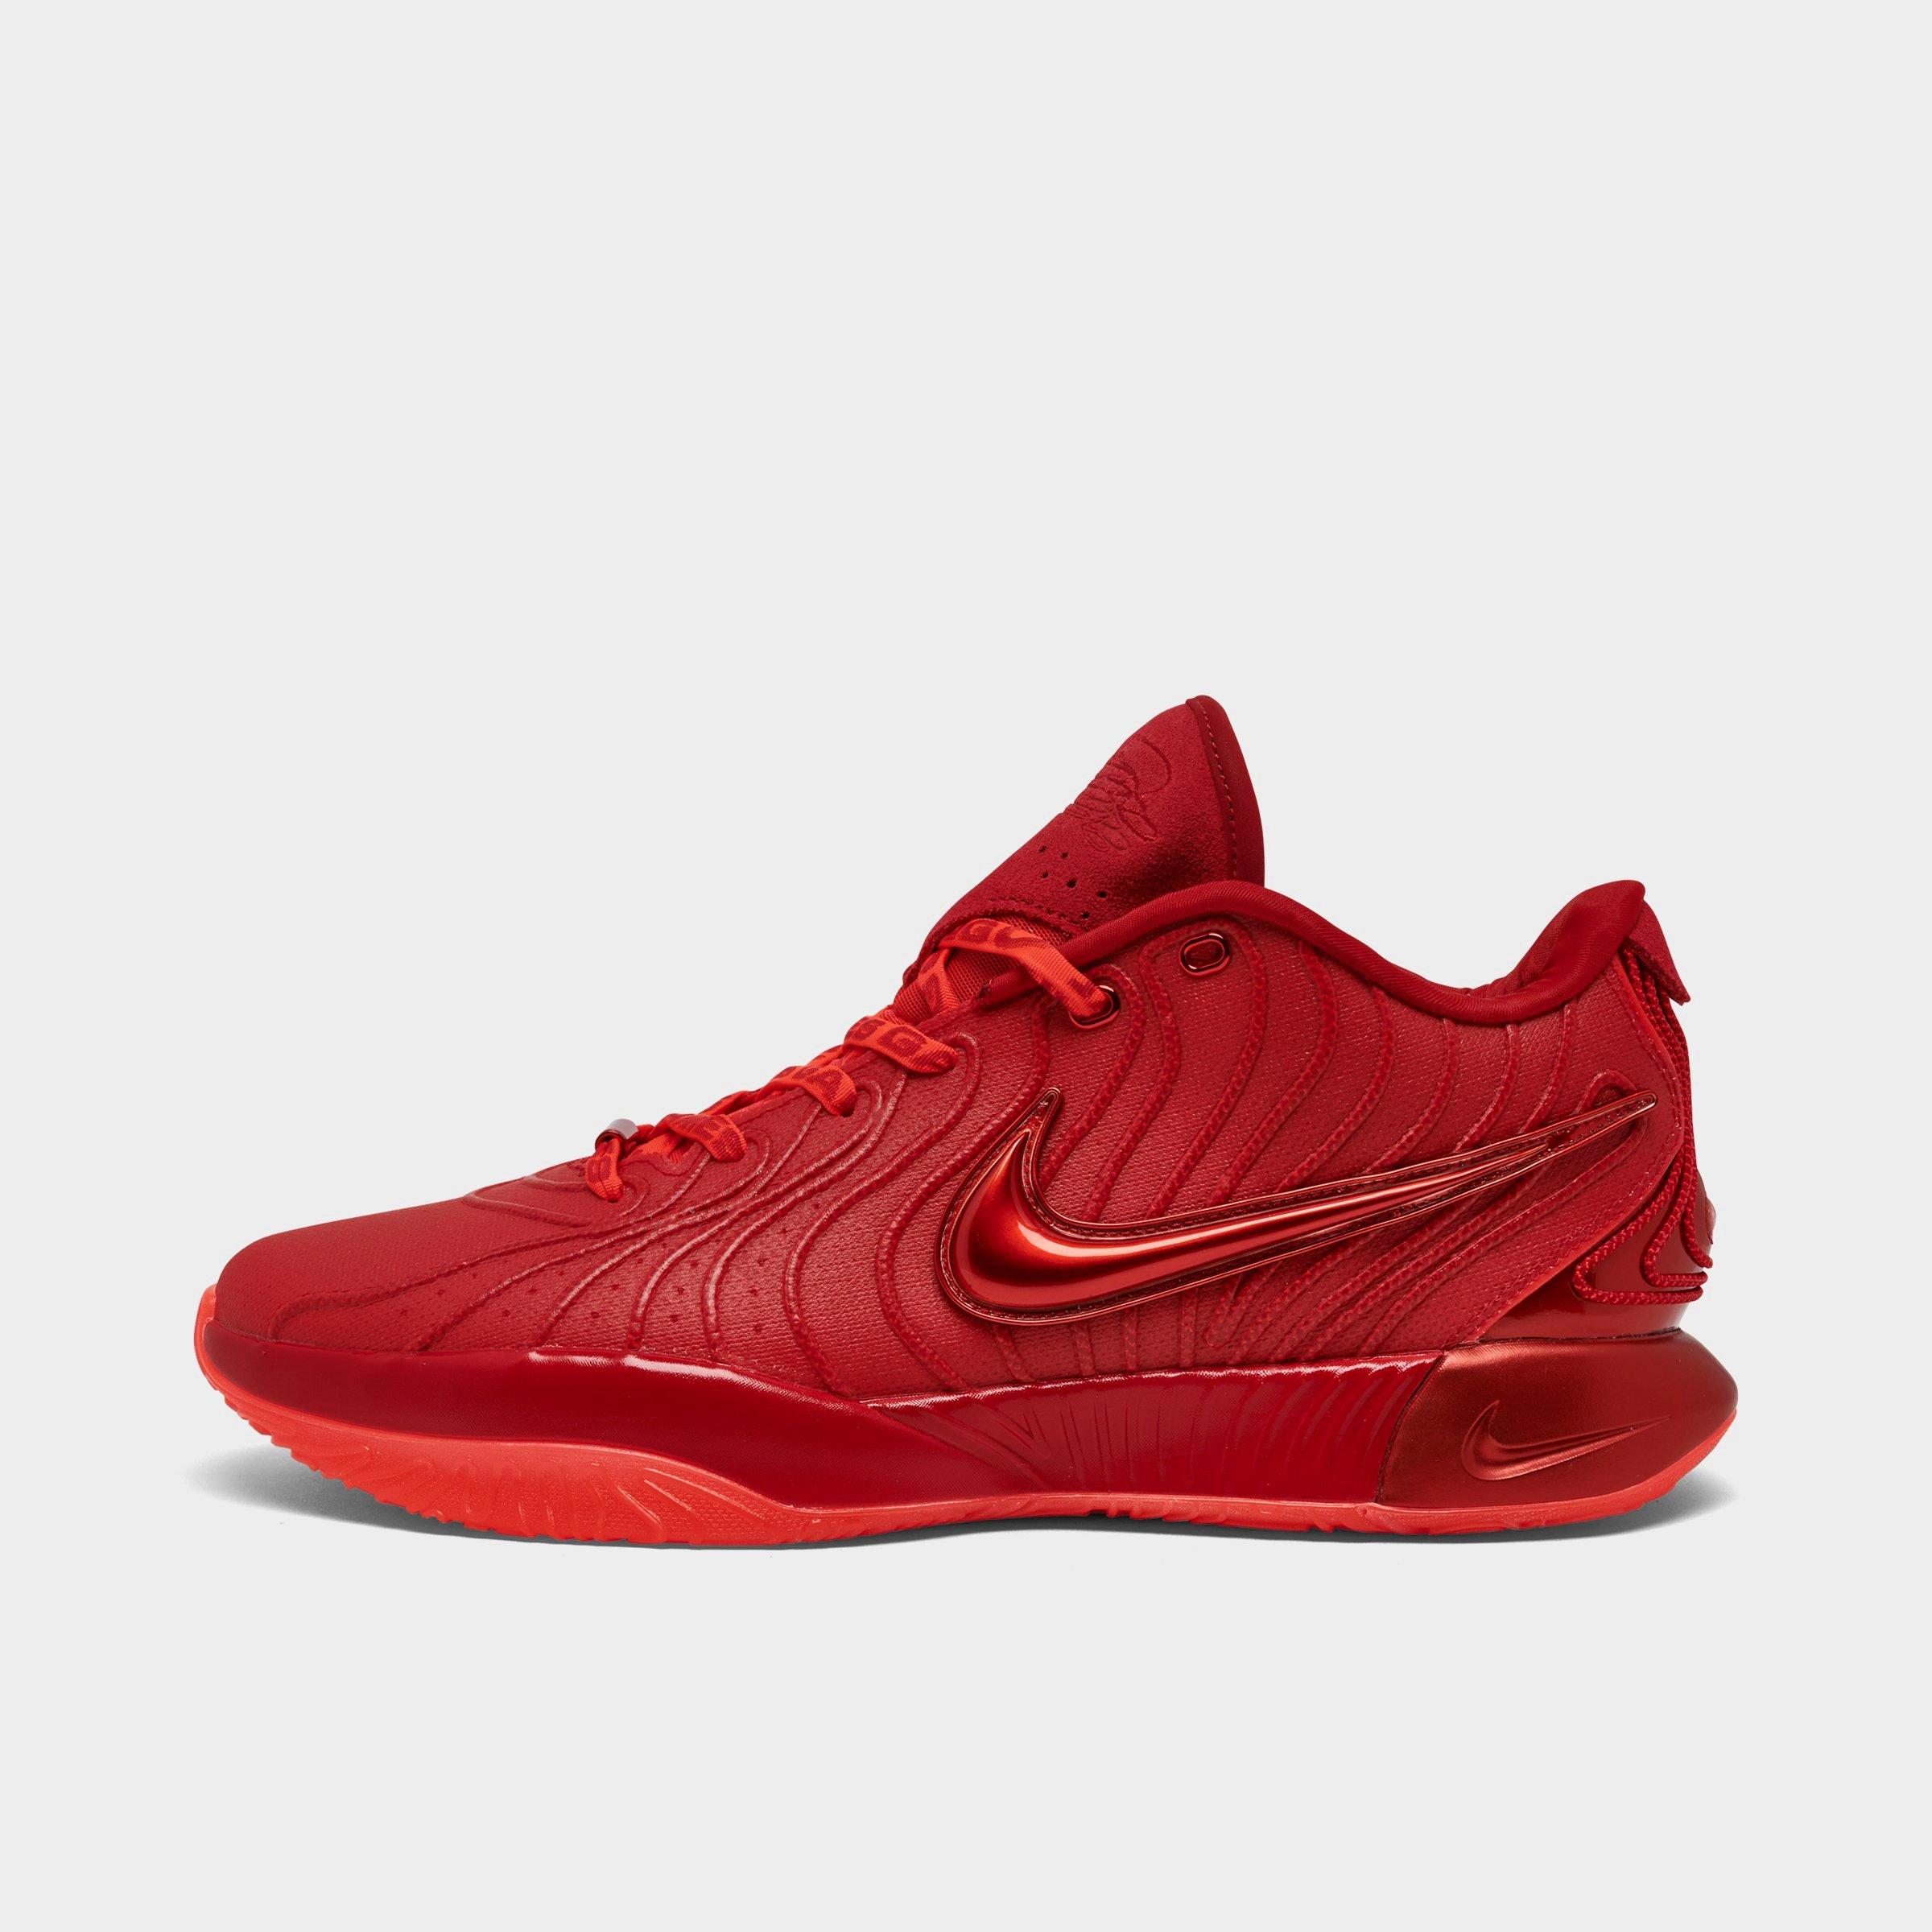 Nike Lebron 21 Basketball Shoes In Red